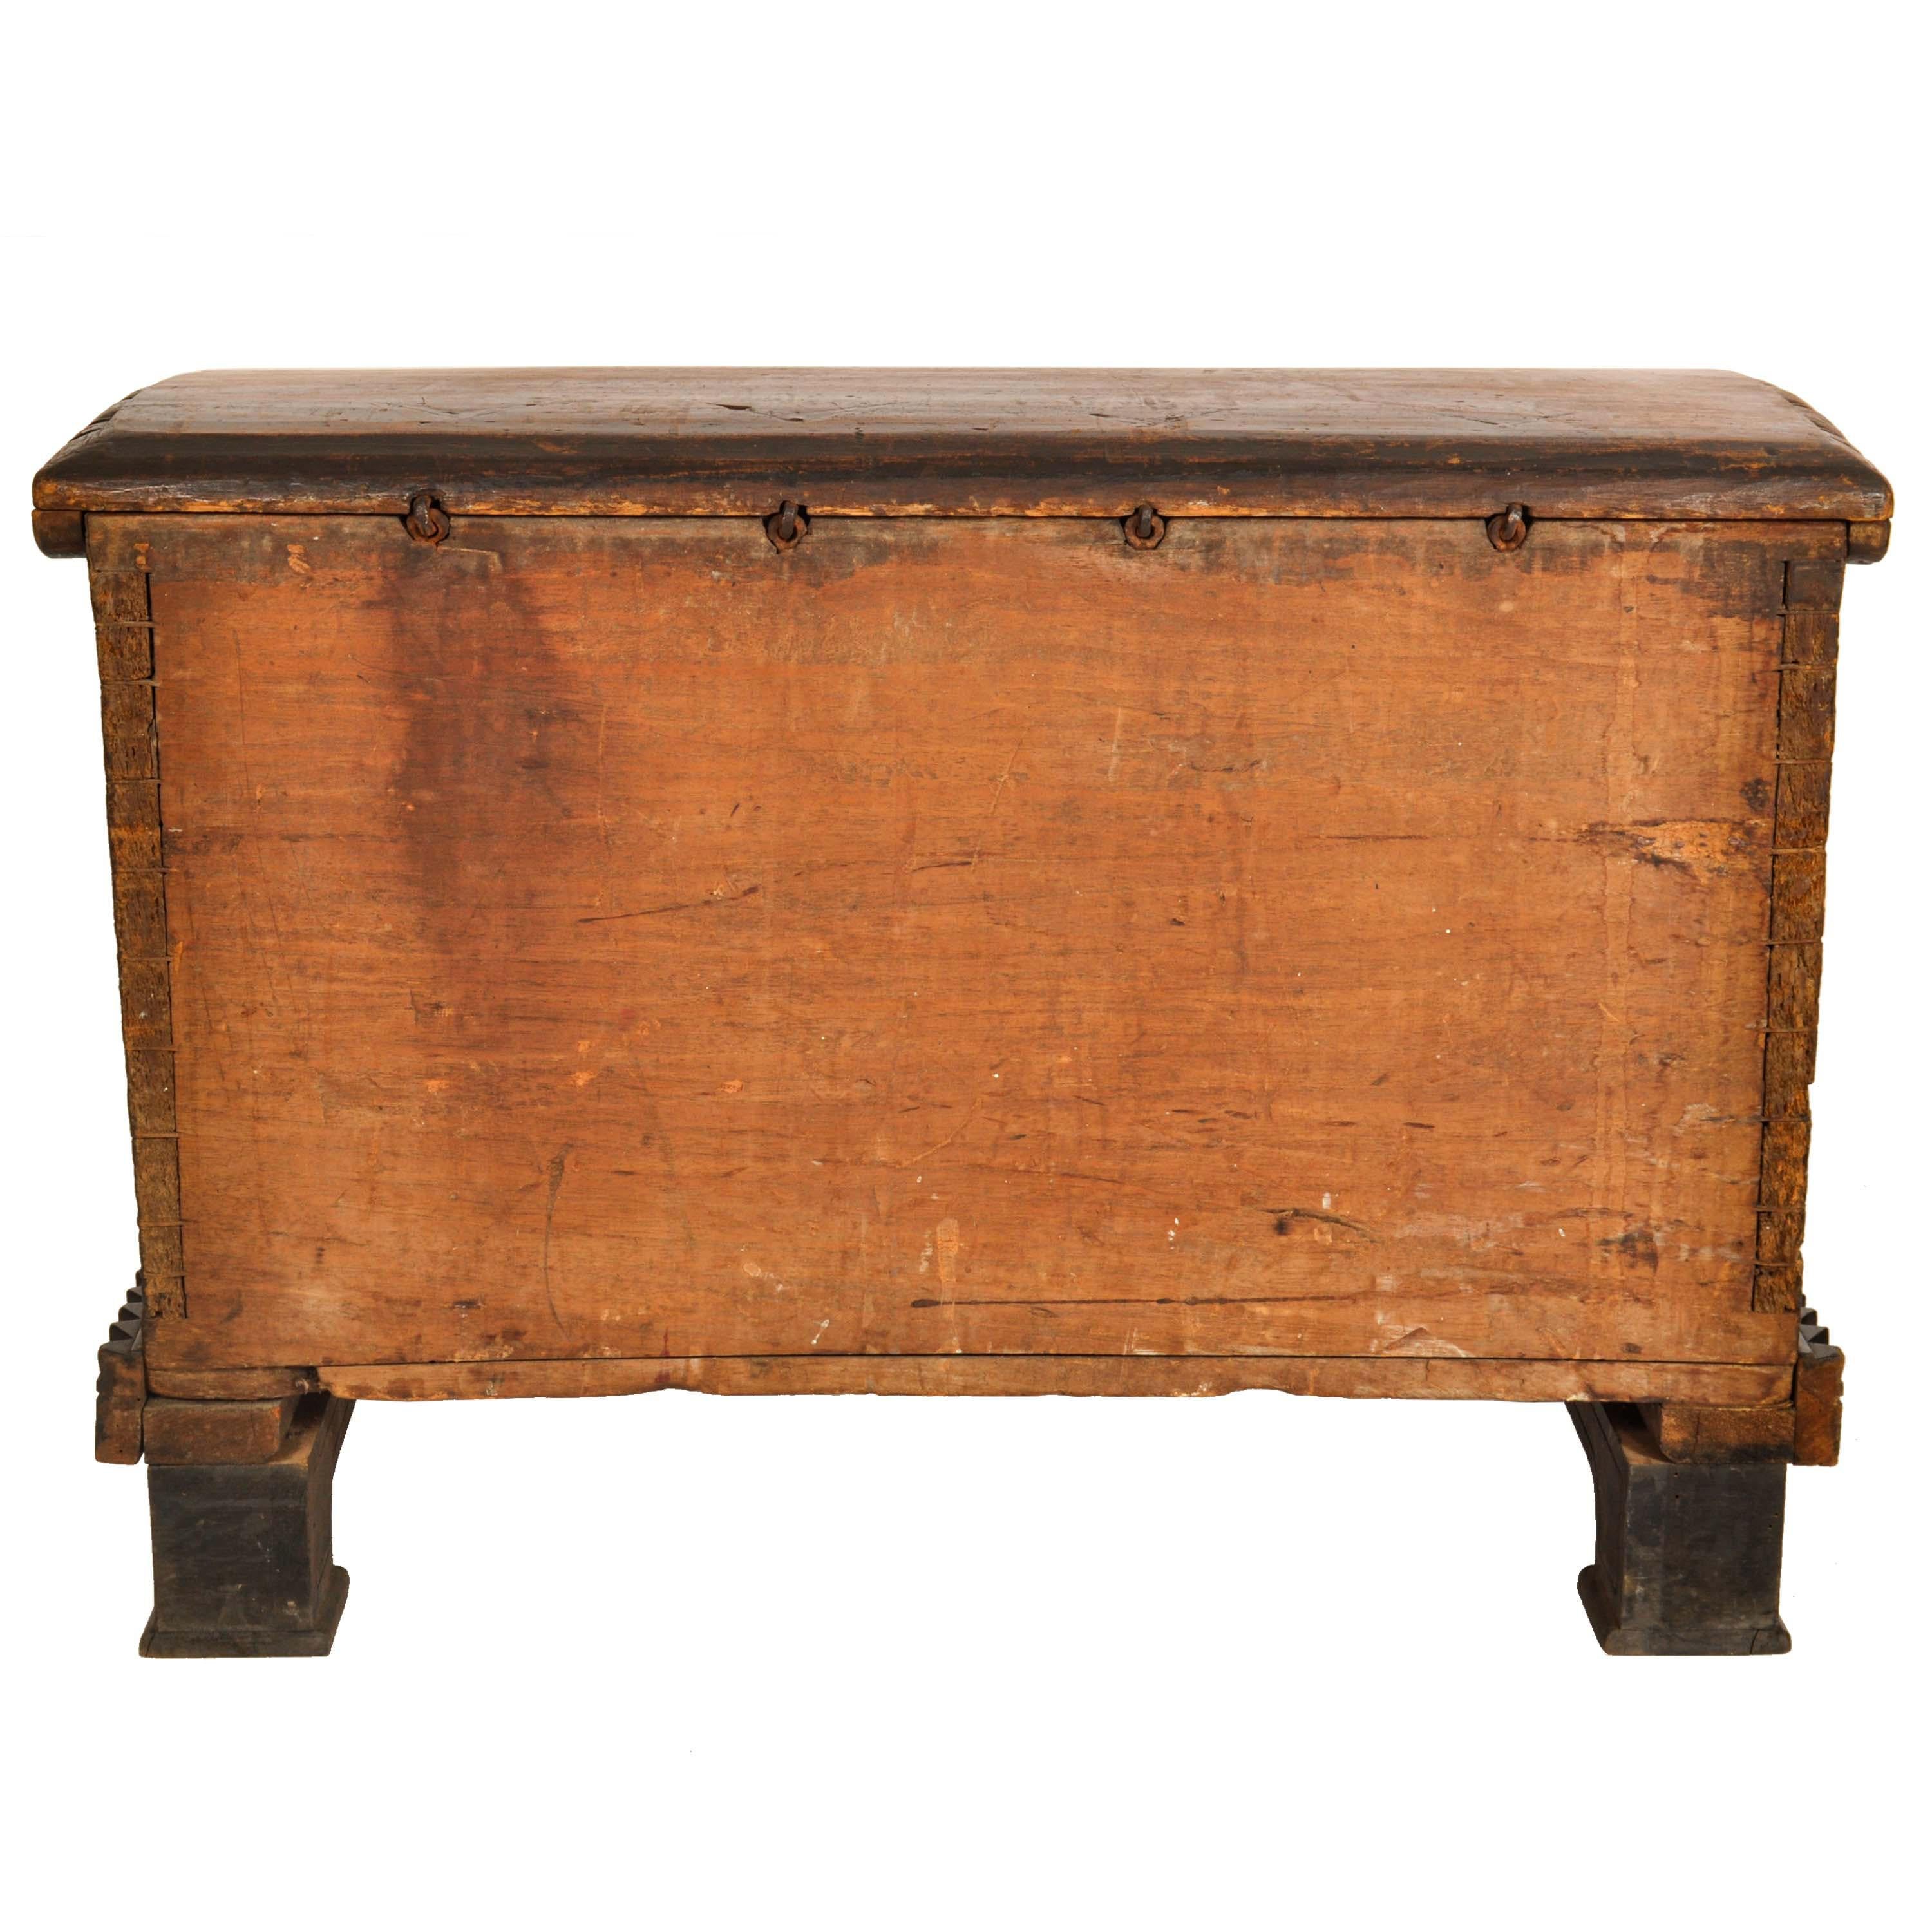 Antique Scandinavian Pine Baroque Folk Art Carved Dowry Chest Trunk Coffer 1780 For Sale 13